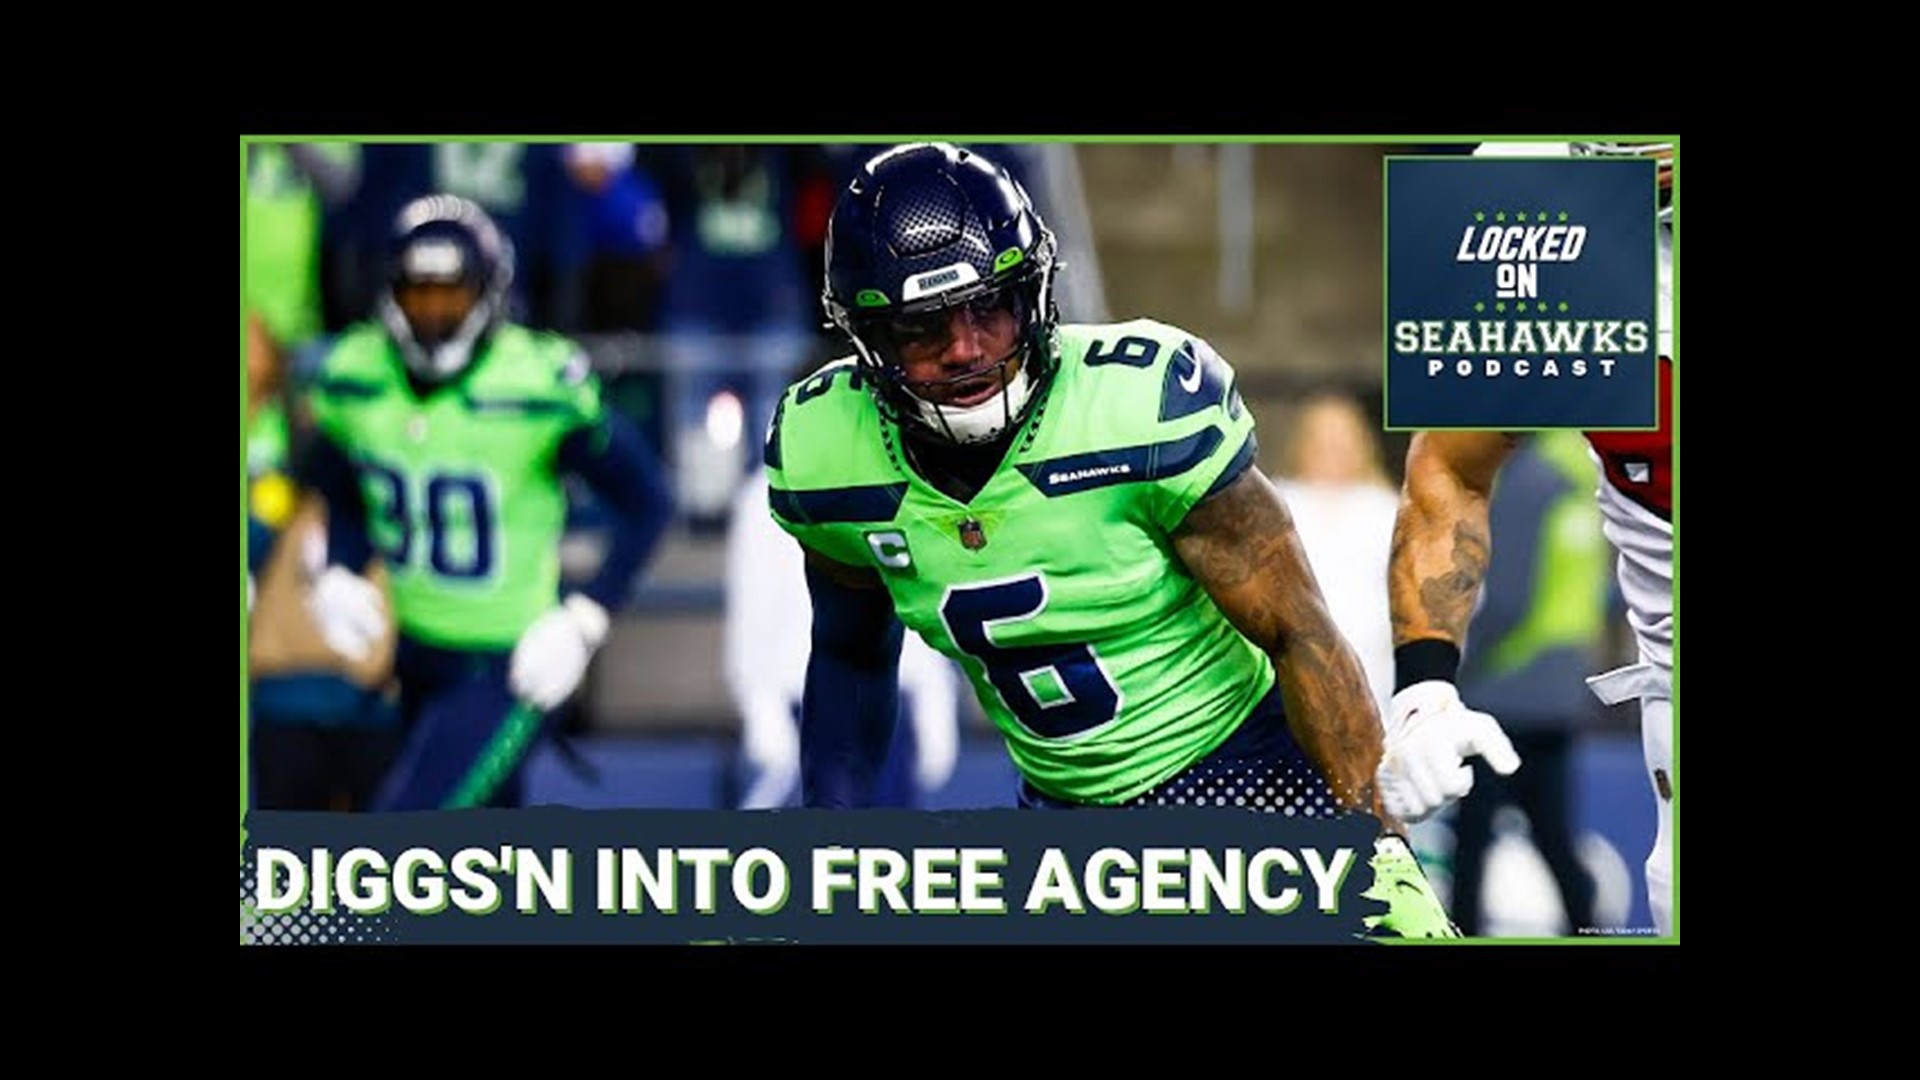 Coming off a third Pro Bowl season for the upstart Seahawks, Quandre Diggs hasn't been shy about adding recruiter to his resume aiming to persuade free agents